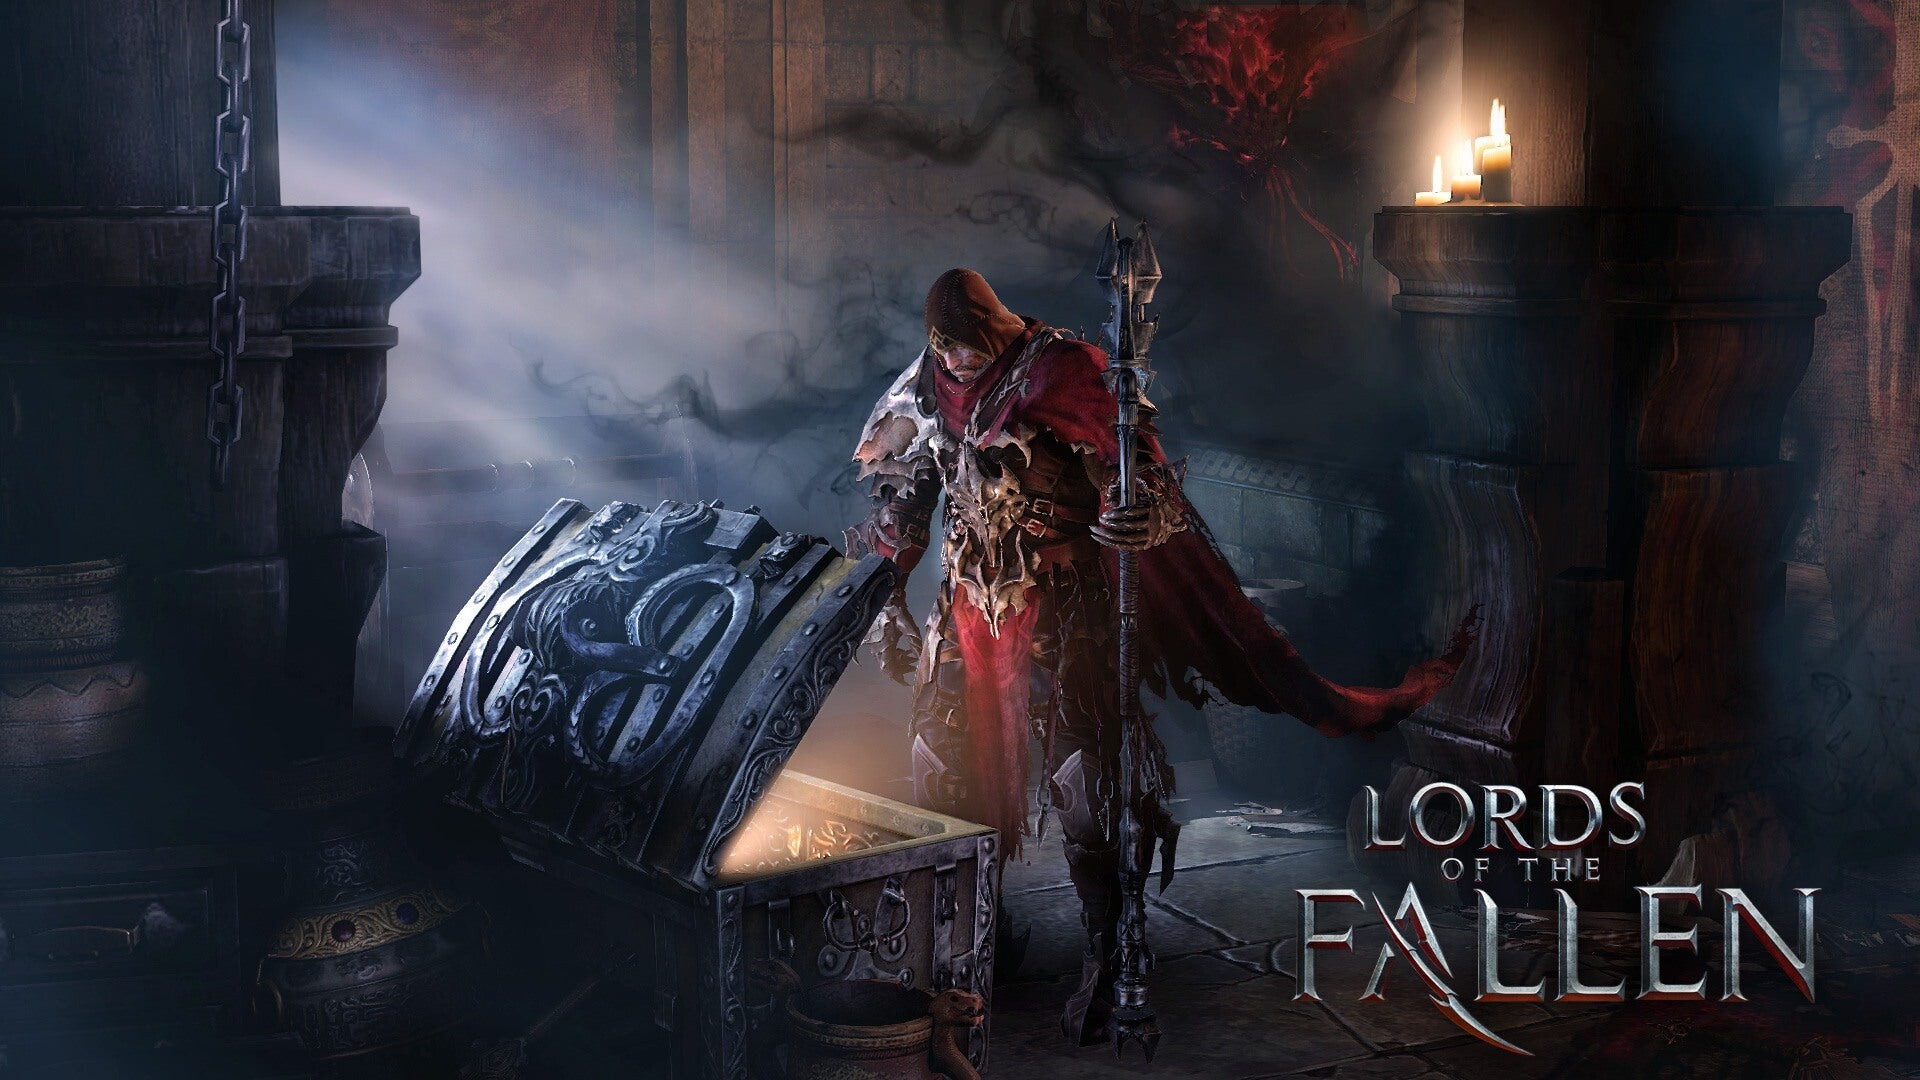 Lords of the Fallen Artwork Poster